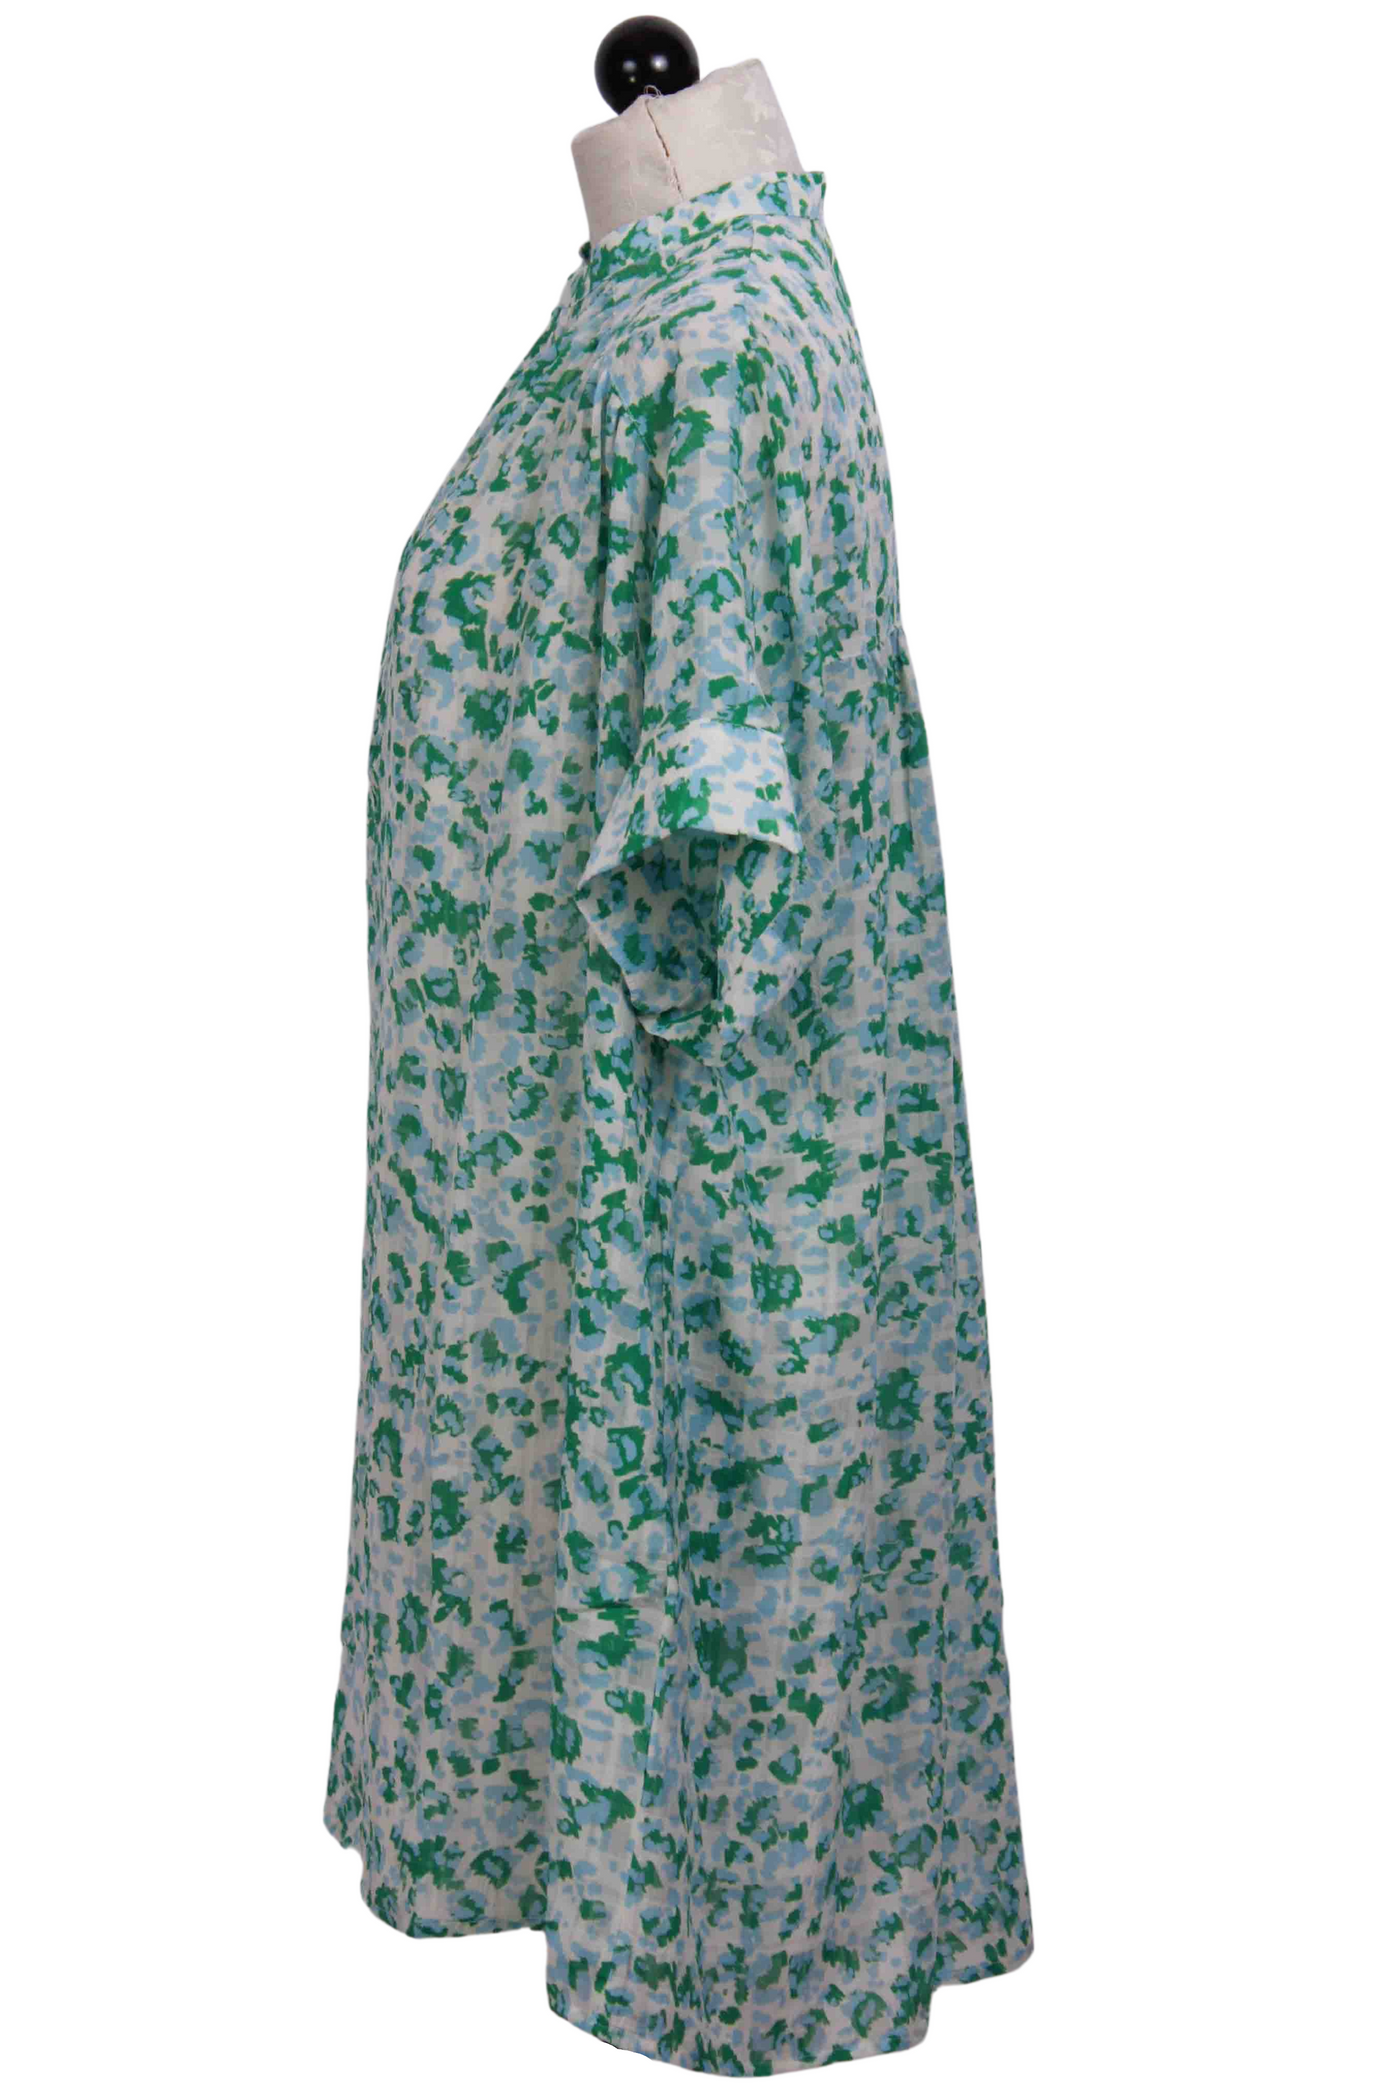 side view of Blue/Green Short Sleeve Printed Shirt Dress by The Korner